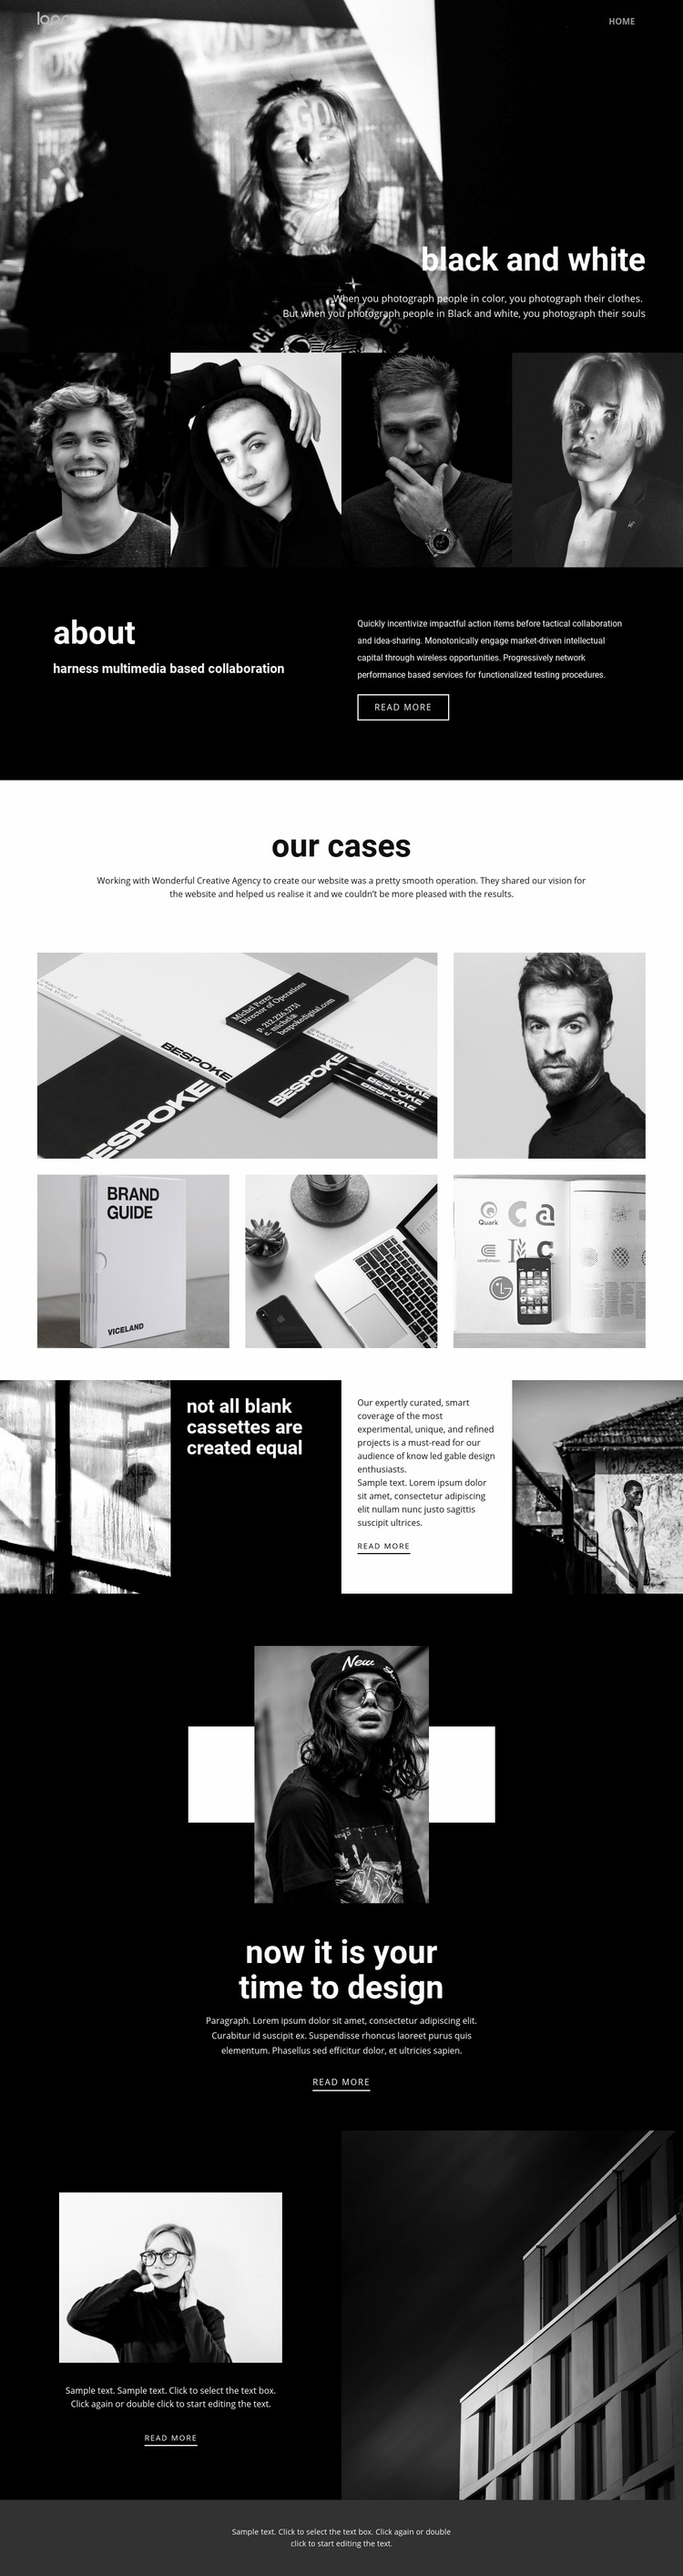 Black and white colors of art Web Page Designer